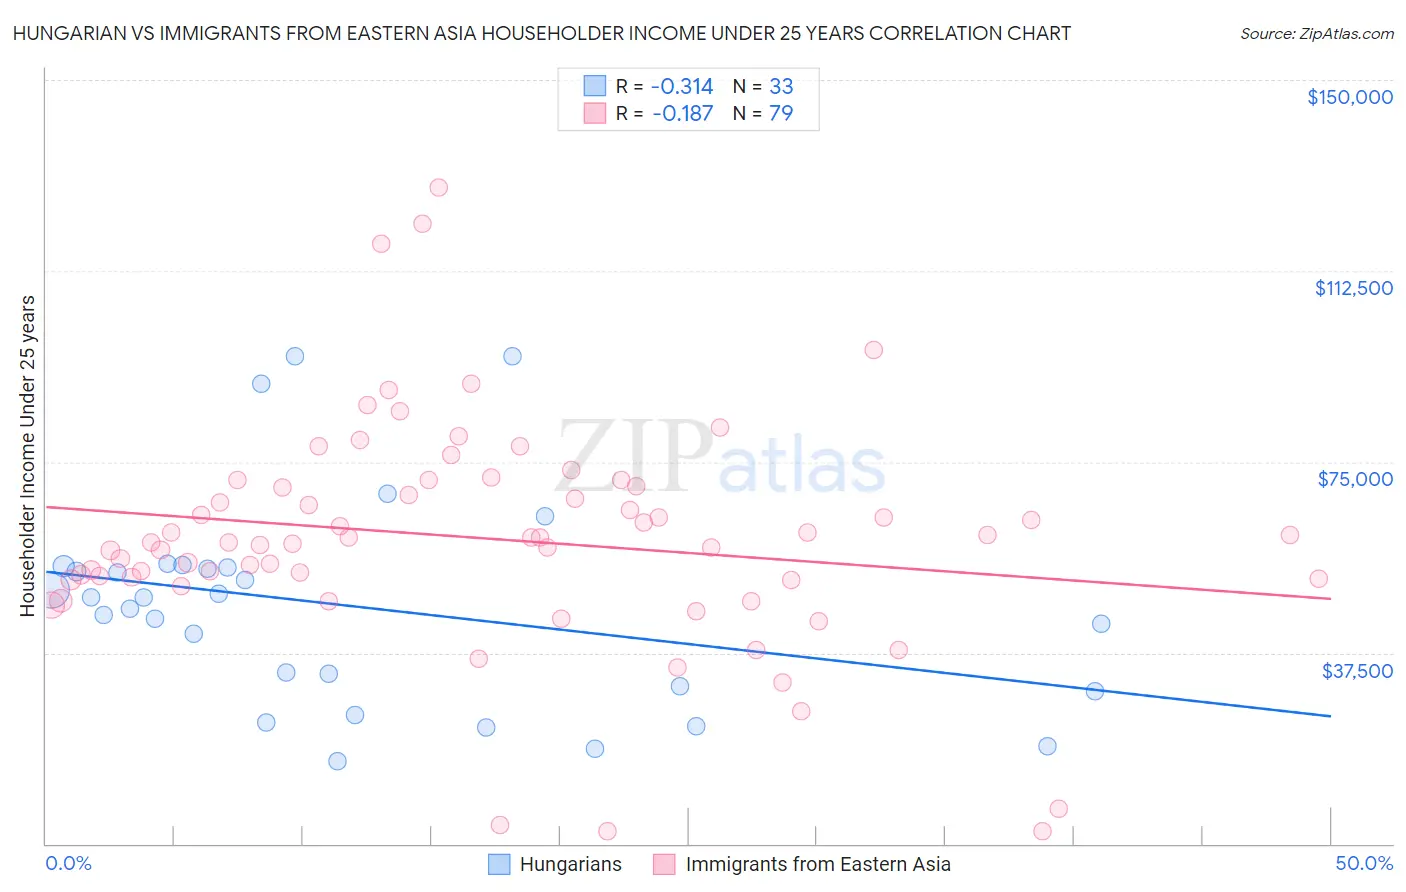 Hungarian vs Immigrants from Eastern Asia Householder Income Under 25 years